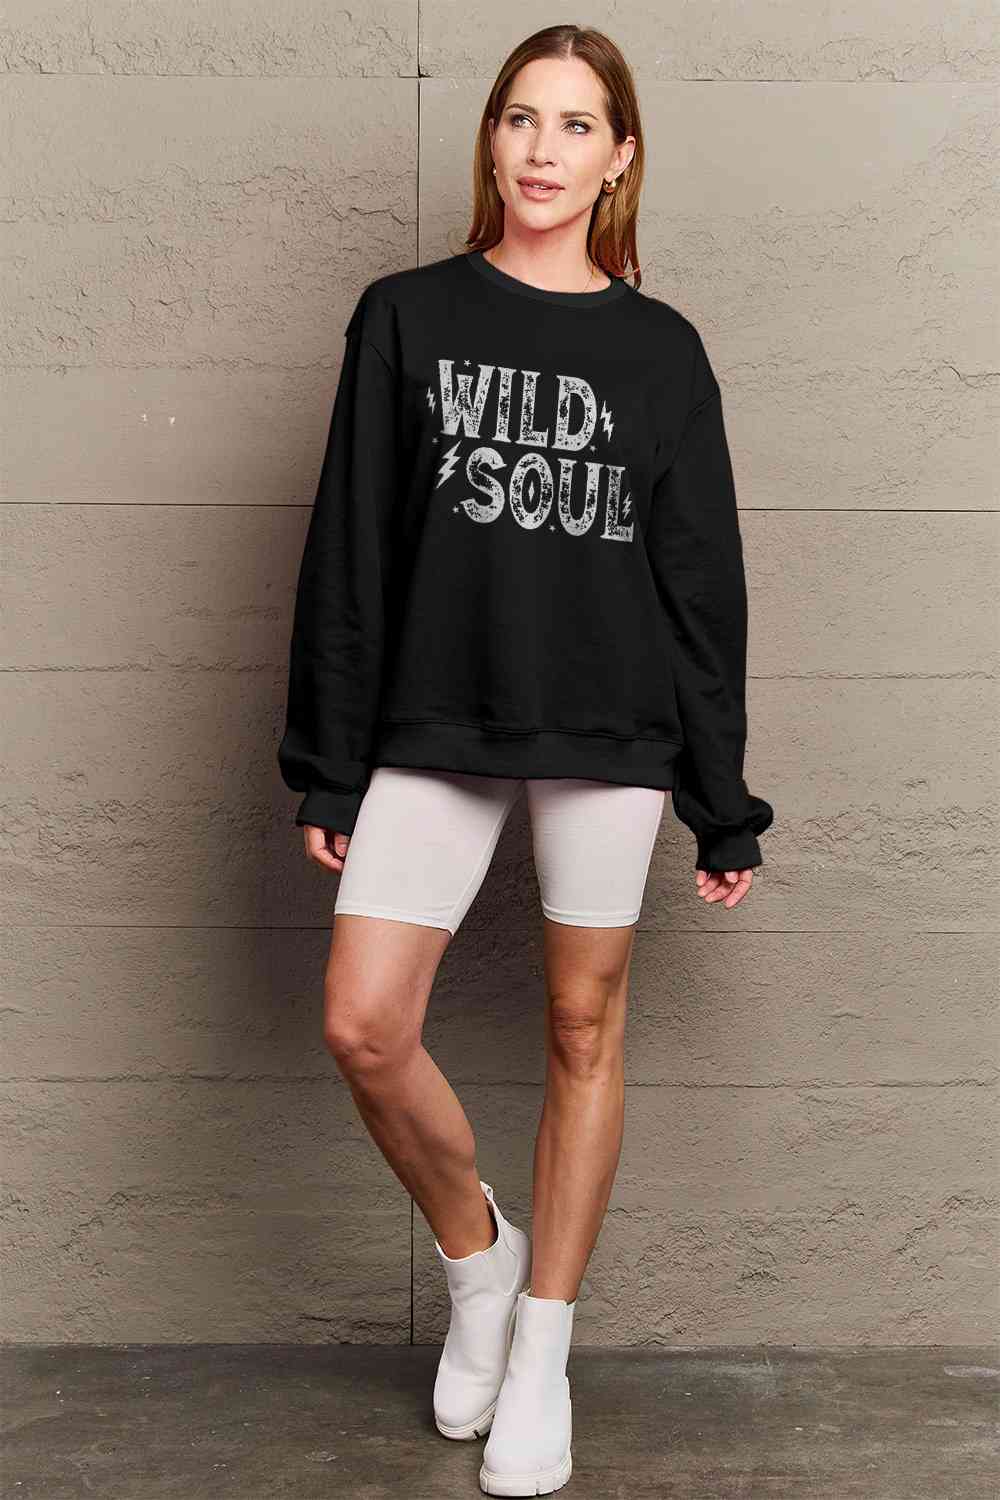 Simply Love Full Size WILD SOUL Graphic Sweatshirt   (Click for Additional Color Options)